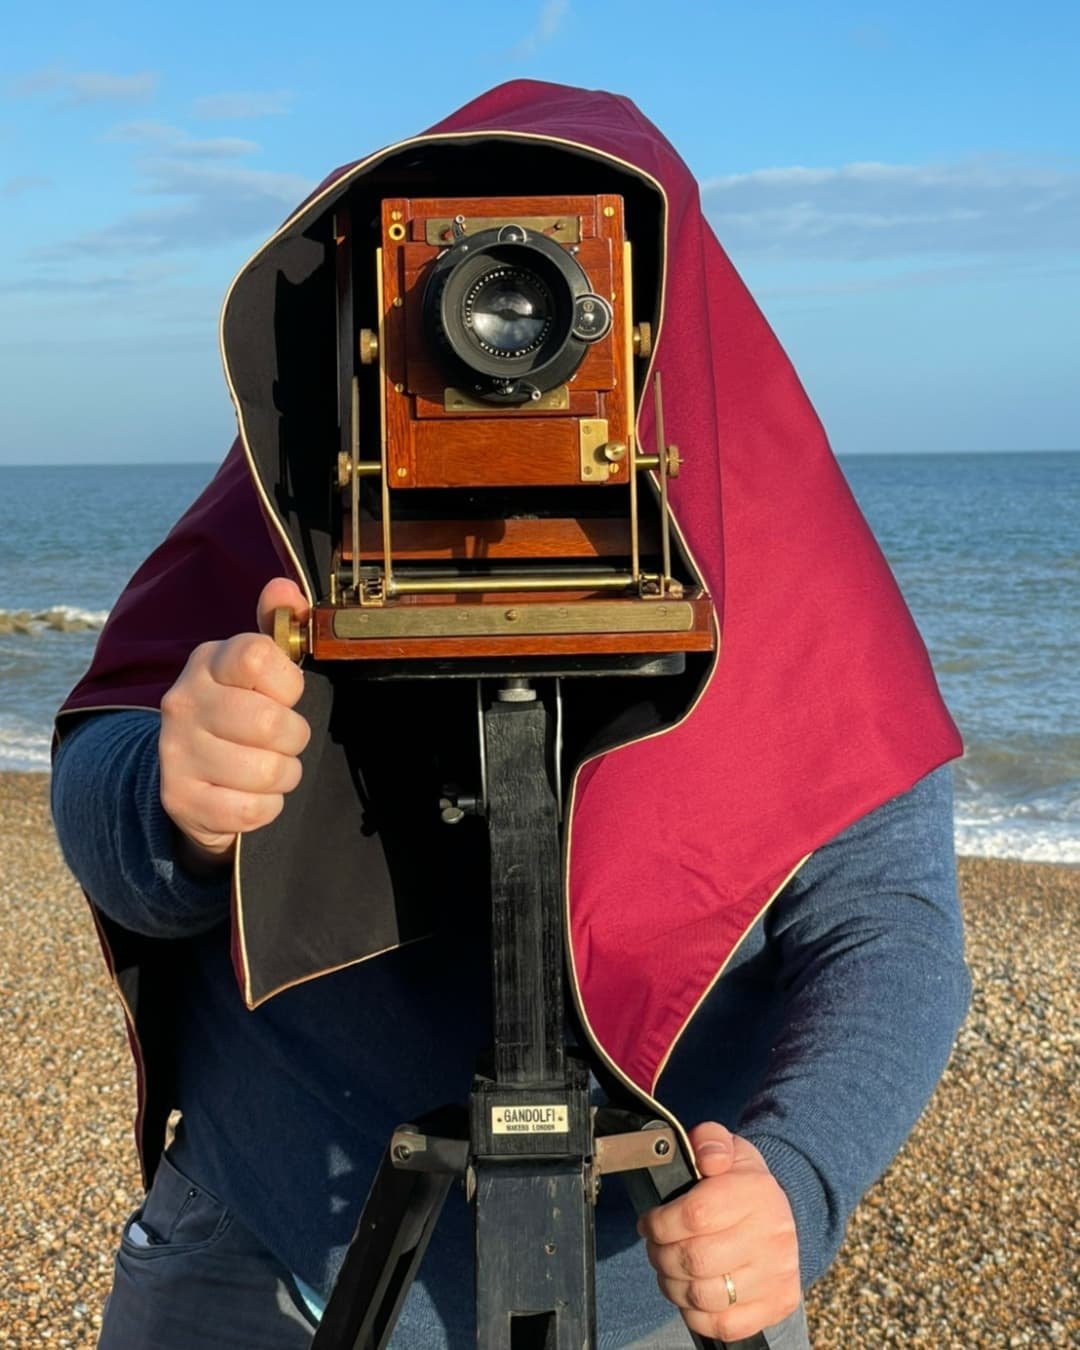 Here I am testing out the first of my traditional cotton focusing cloths with my Gandolfi 4x5&quot; Precision on a breezy day here on the south coast of England. The cloths are available to preorder at www.burleycameras.com #focusingcloth #darkcloth 